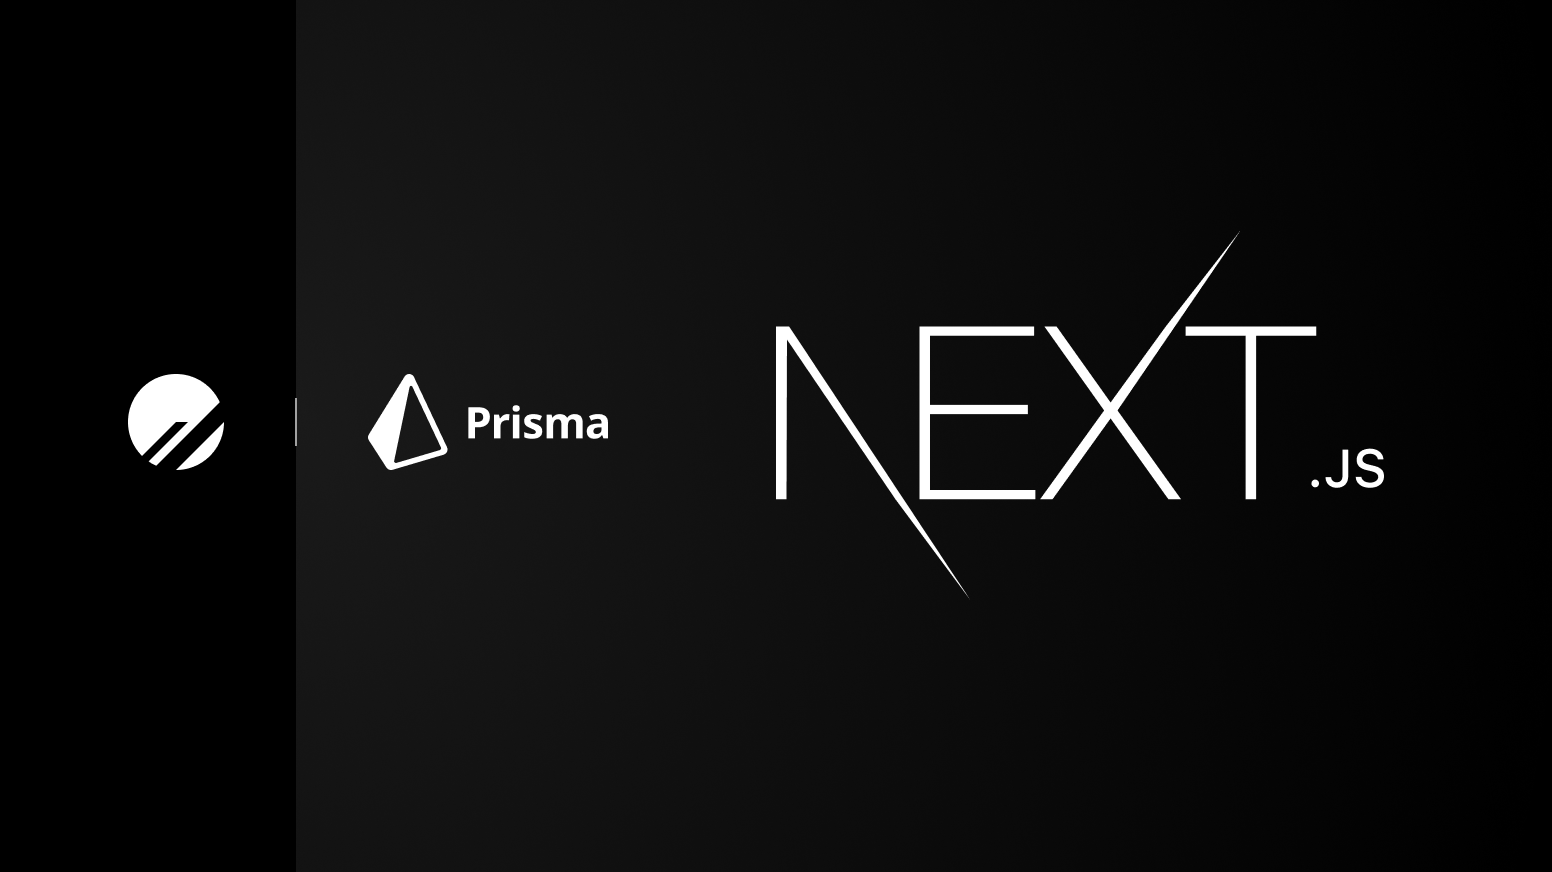 https://planetscale.com/_next/image?url=%2Fassets%2Fblog%2Fcontent%2Fhow-to-setup-next-js-with-prisma-and-planetscale%2Ff31e3c8da90e9fef220b8ce60a6b17a2449d4e14-1552x872.png&w=3840&q=90